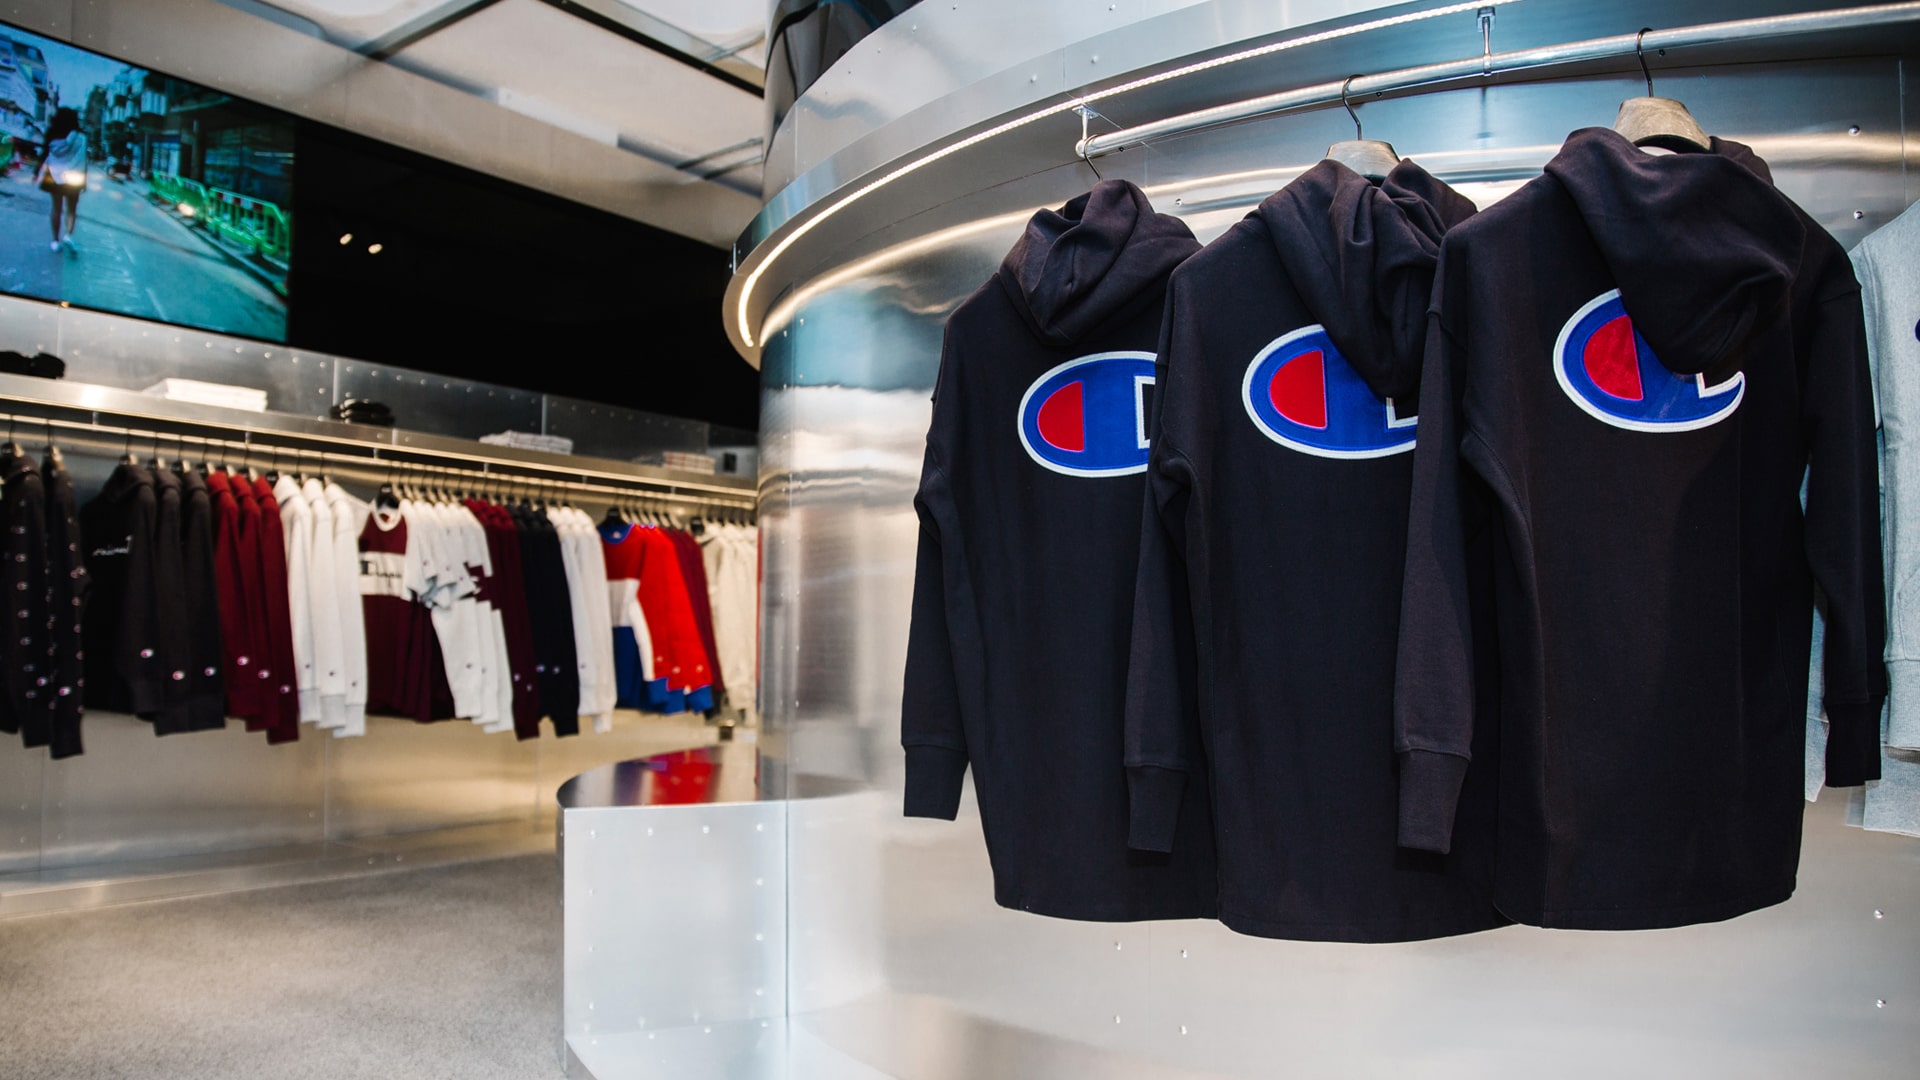 Athleticwear's third store in US marks its in Chicago | Retail USA